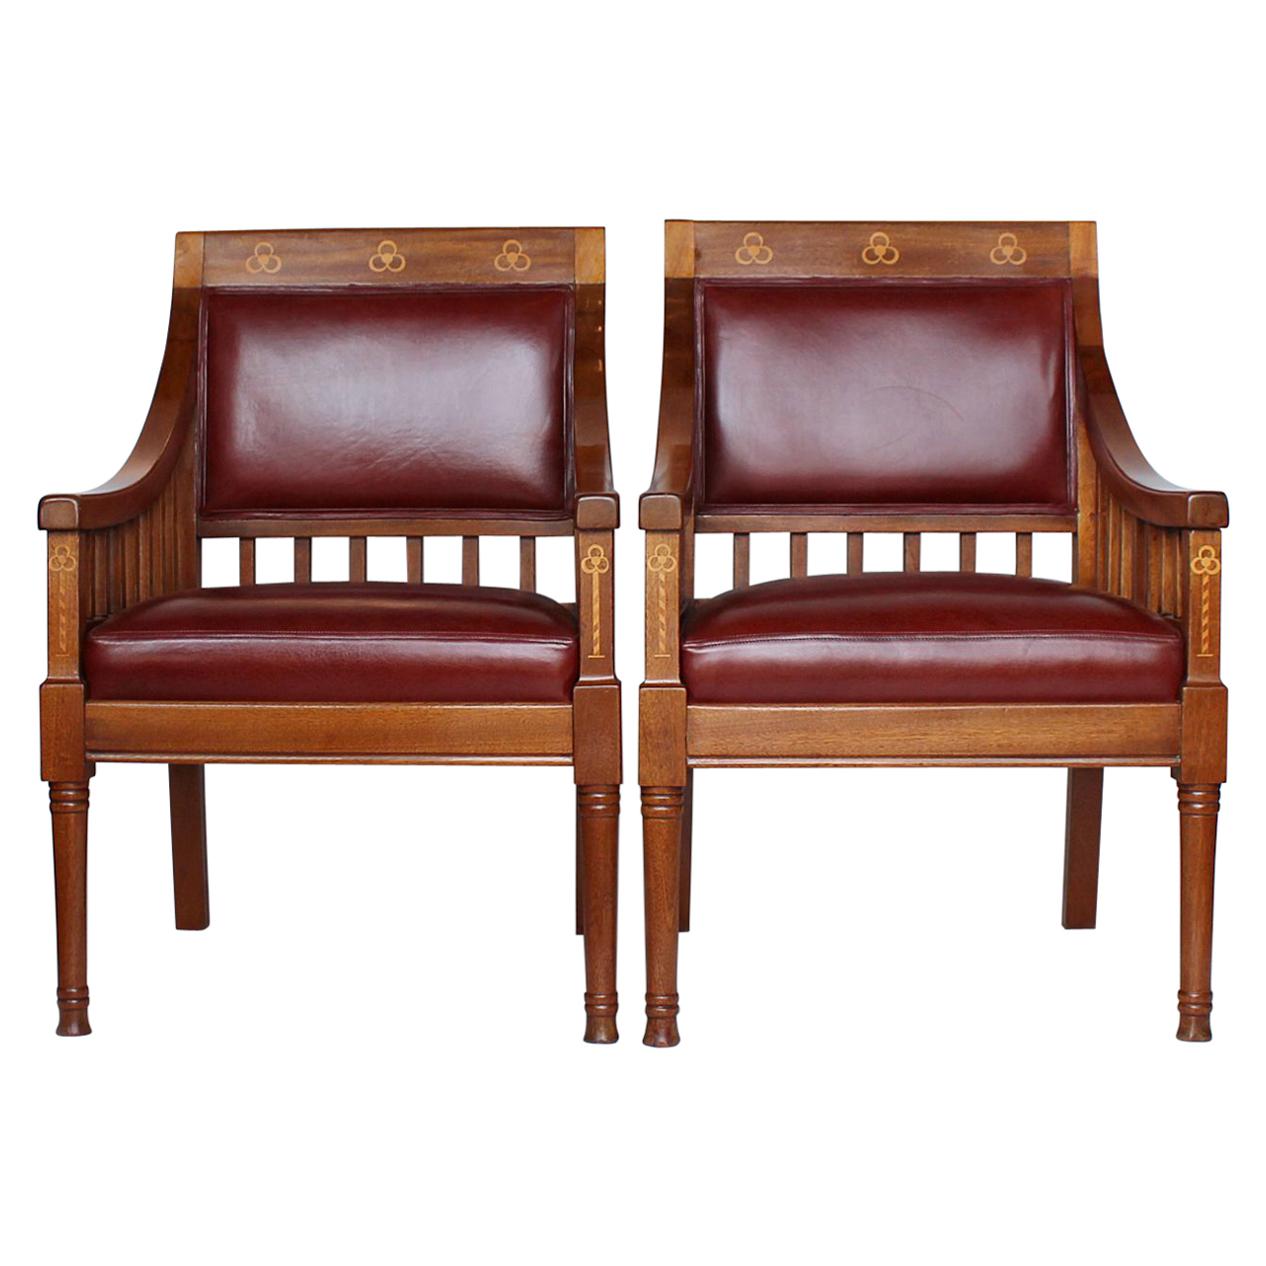 Pair of Arts & Crafts Armchairs